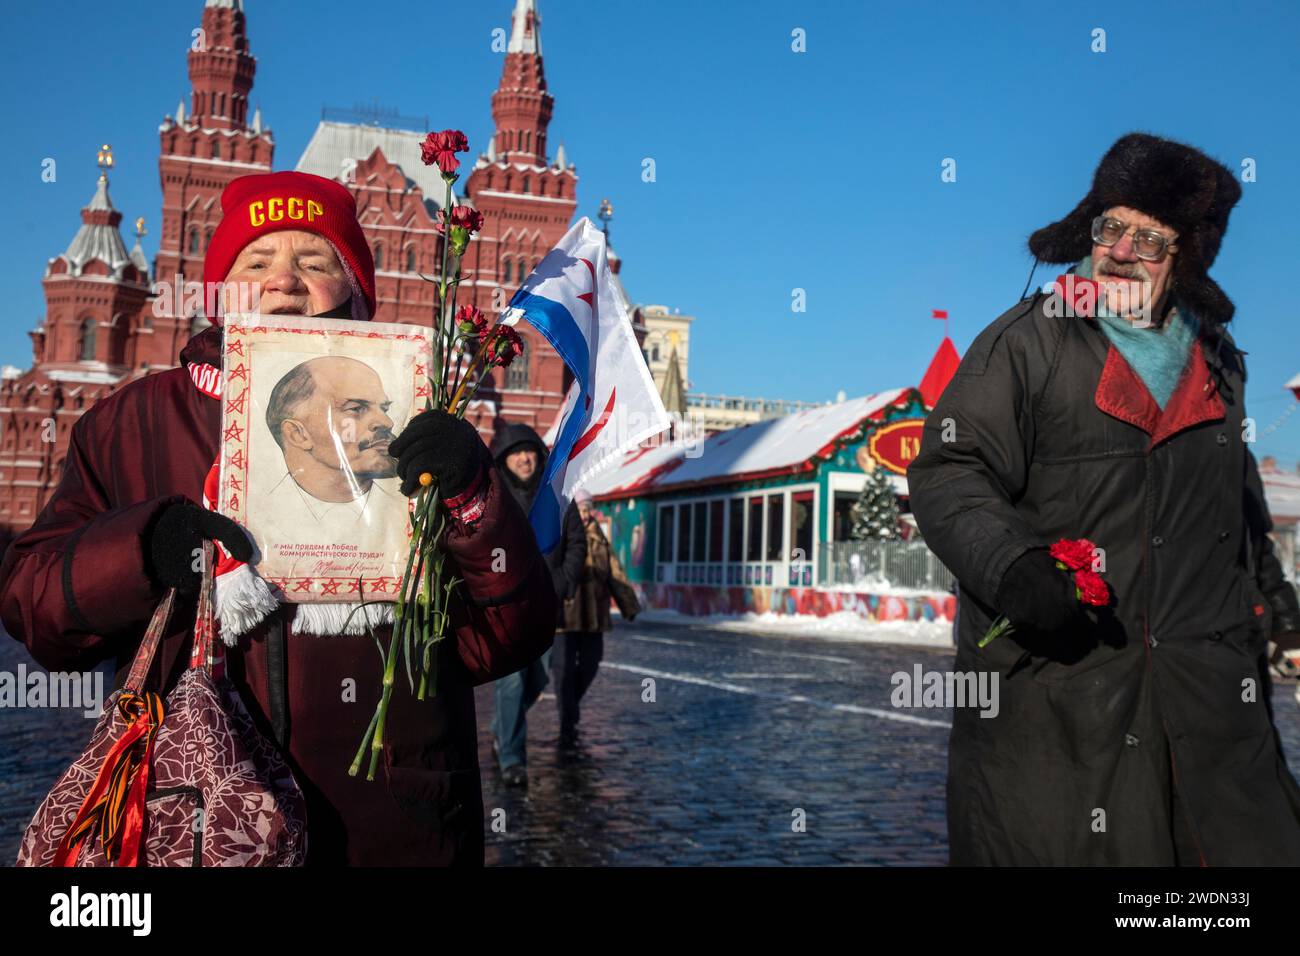 Moscow, Russia. 21st of January, 2024. Russian Communist supporters carry portrait of Vladimir Lenin as they walk to lay flowers at the Mausoleum of the Soviet founder Vladimir Lenin to mark the 100th anniversary of his death, in Red Square, Moscow, Russia. Credit: Nikolay Vinokurov/Alamy Live News Stock Photo